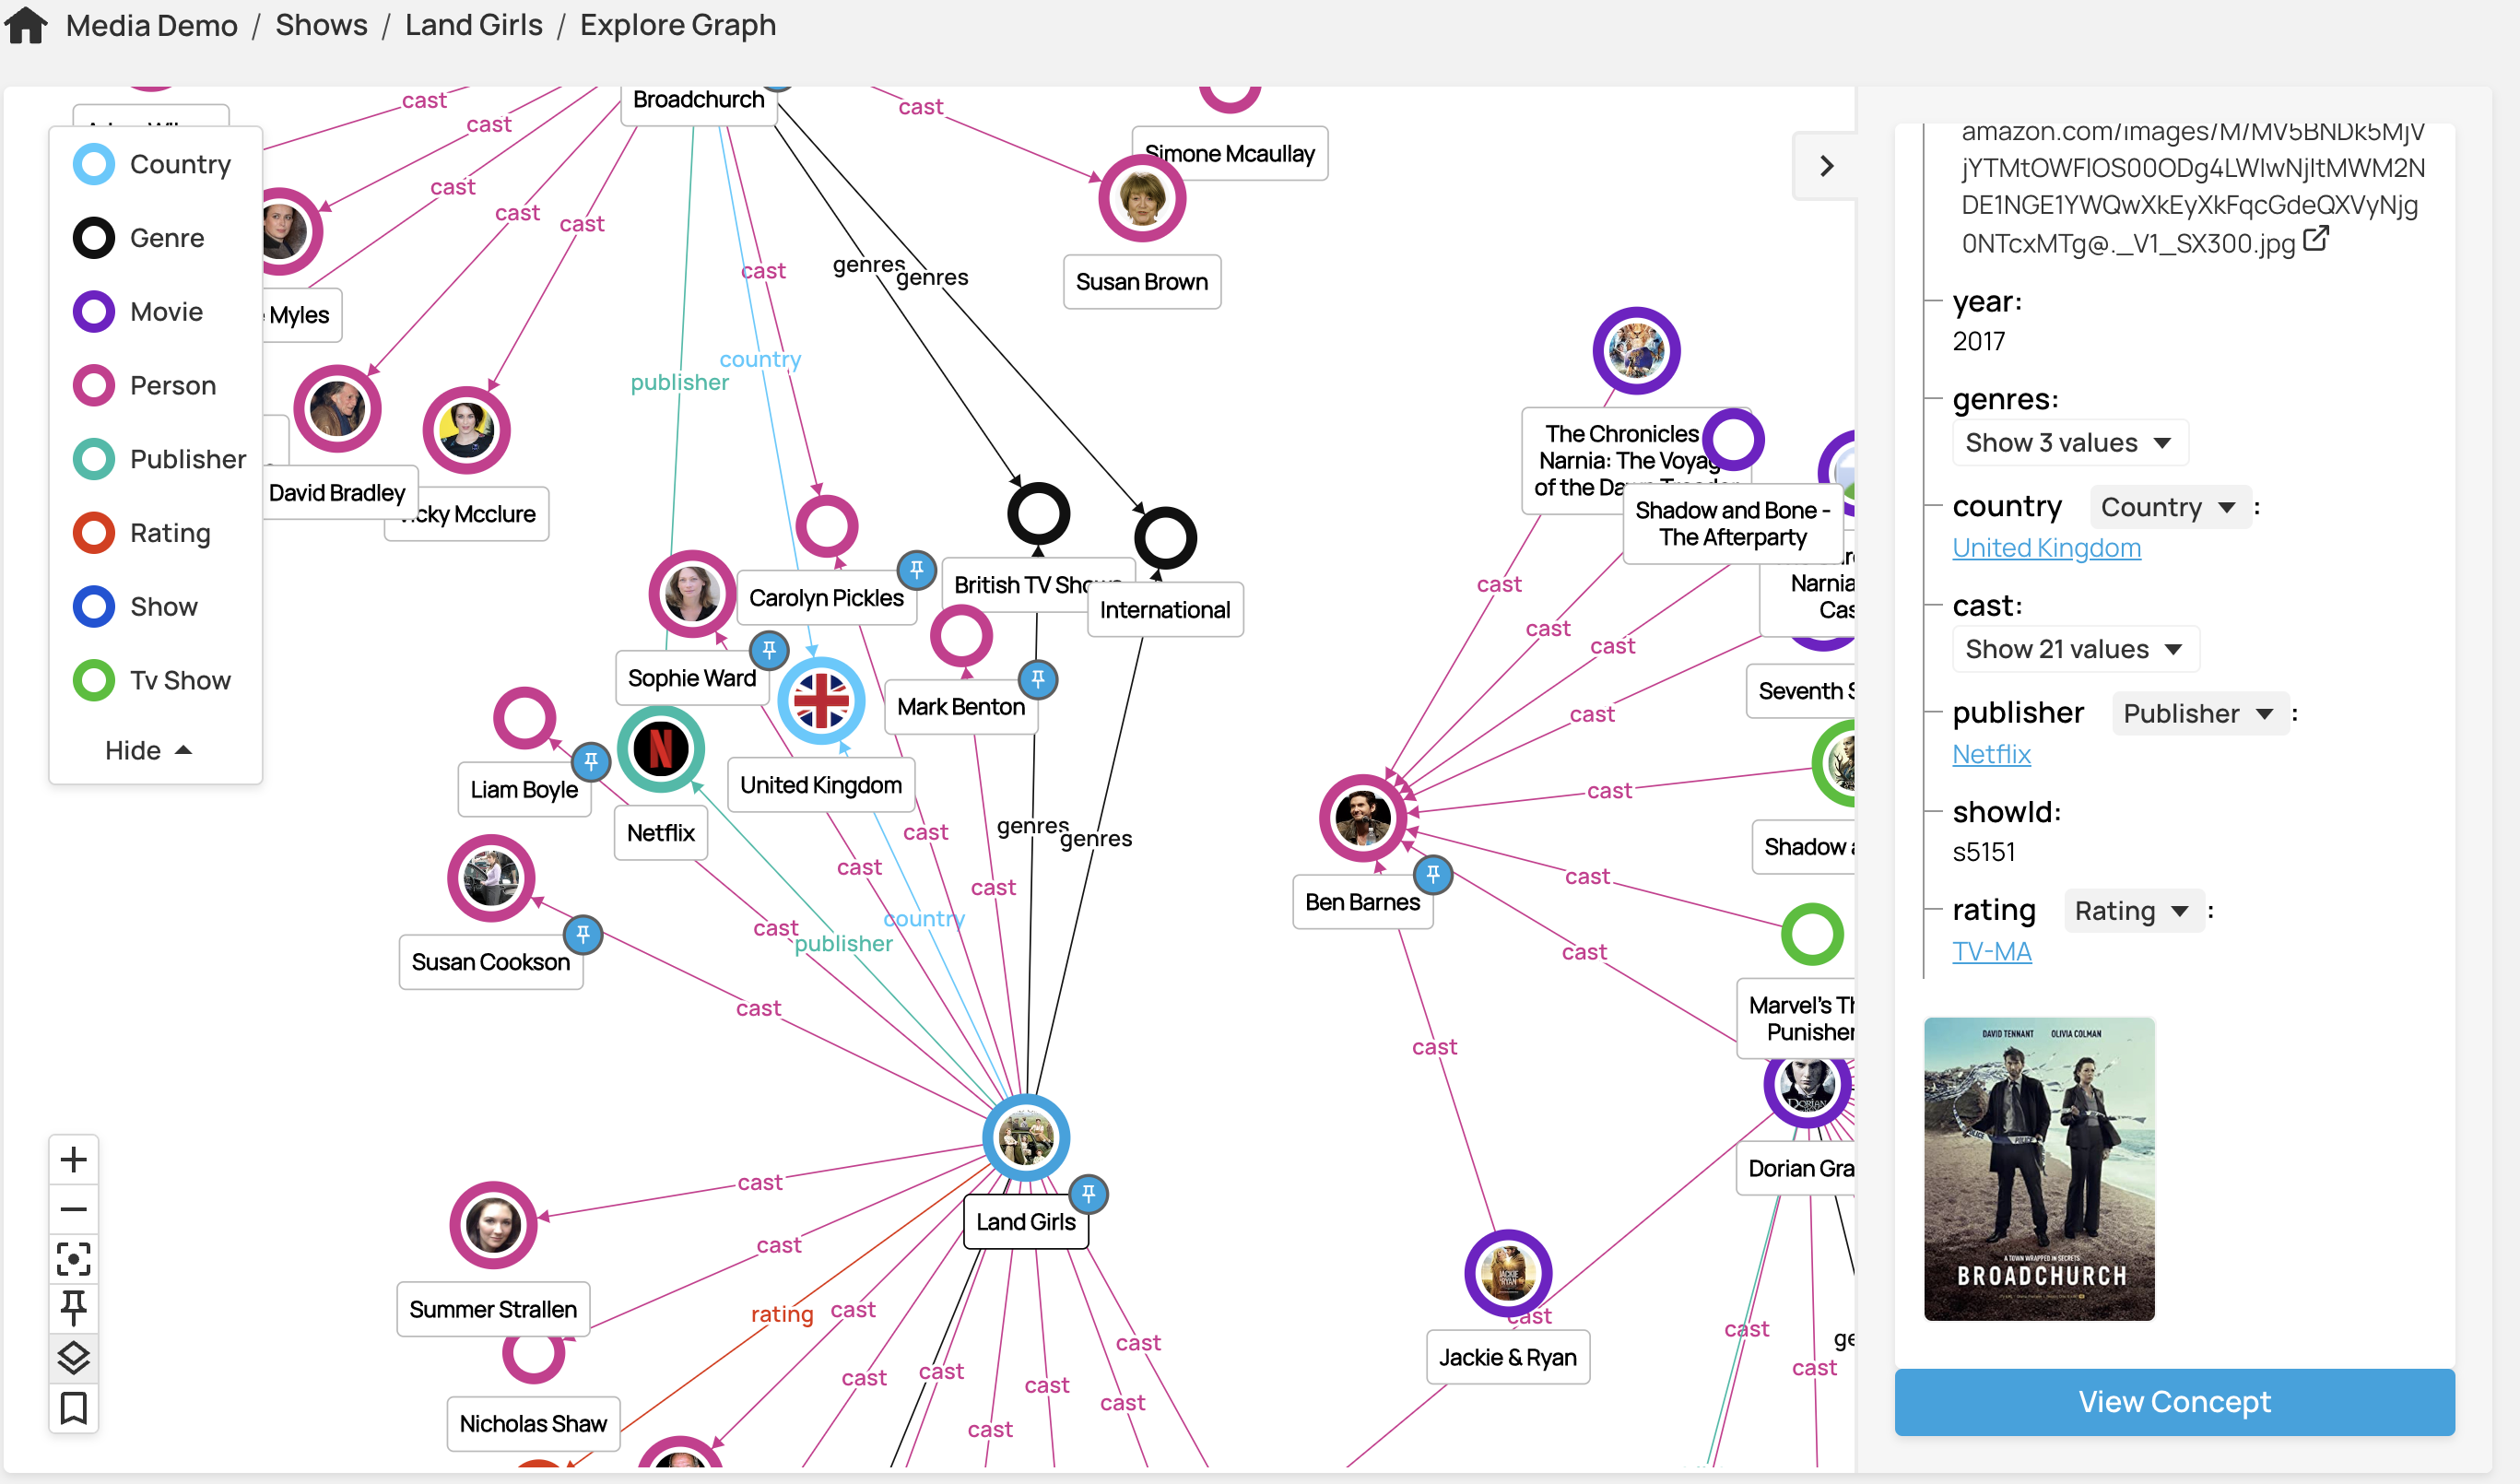 Explore and demo the Knowledge Graph immediately!